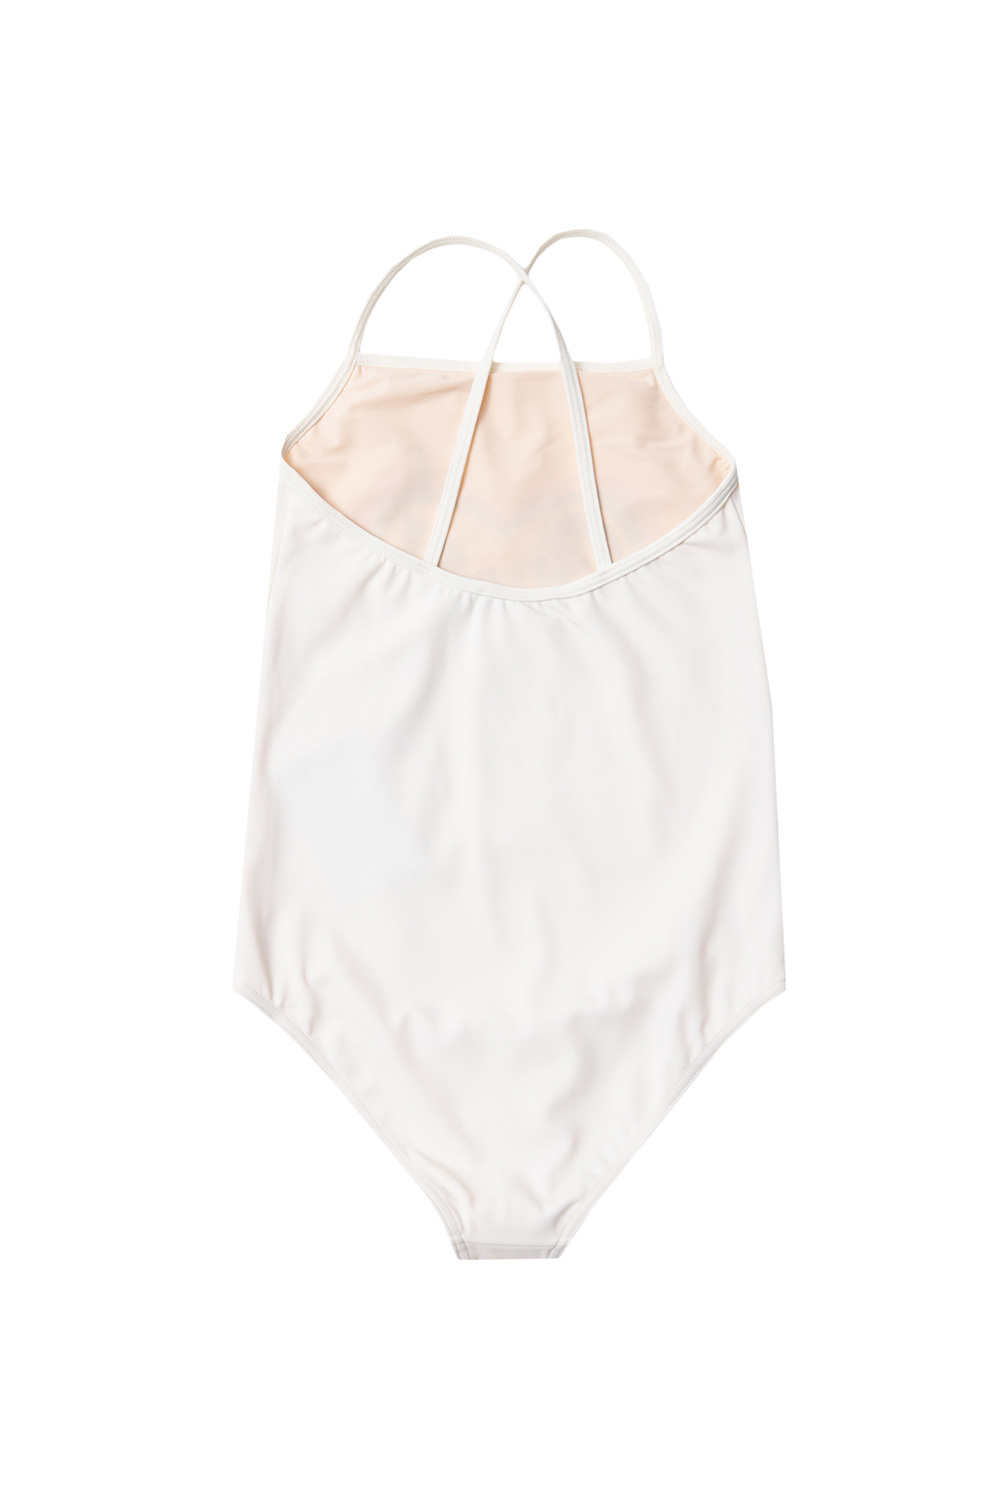 Gucci Kids One-piece swimsuit